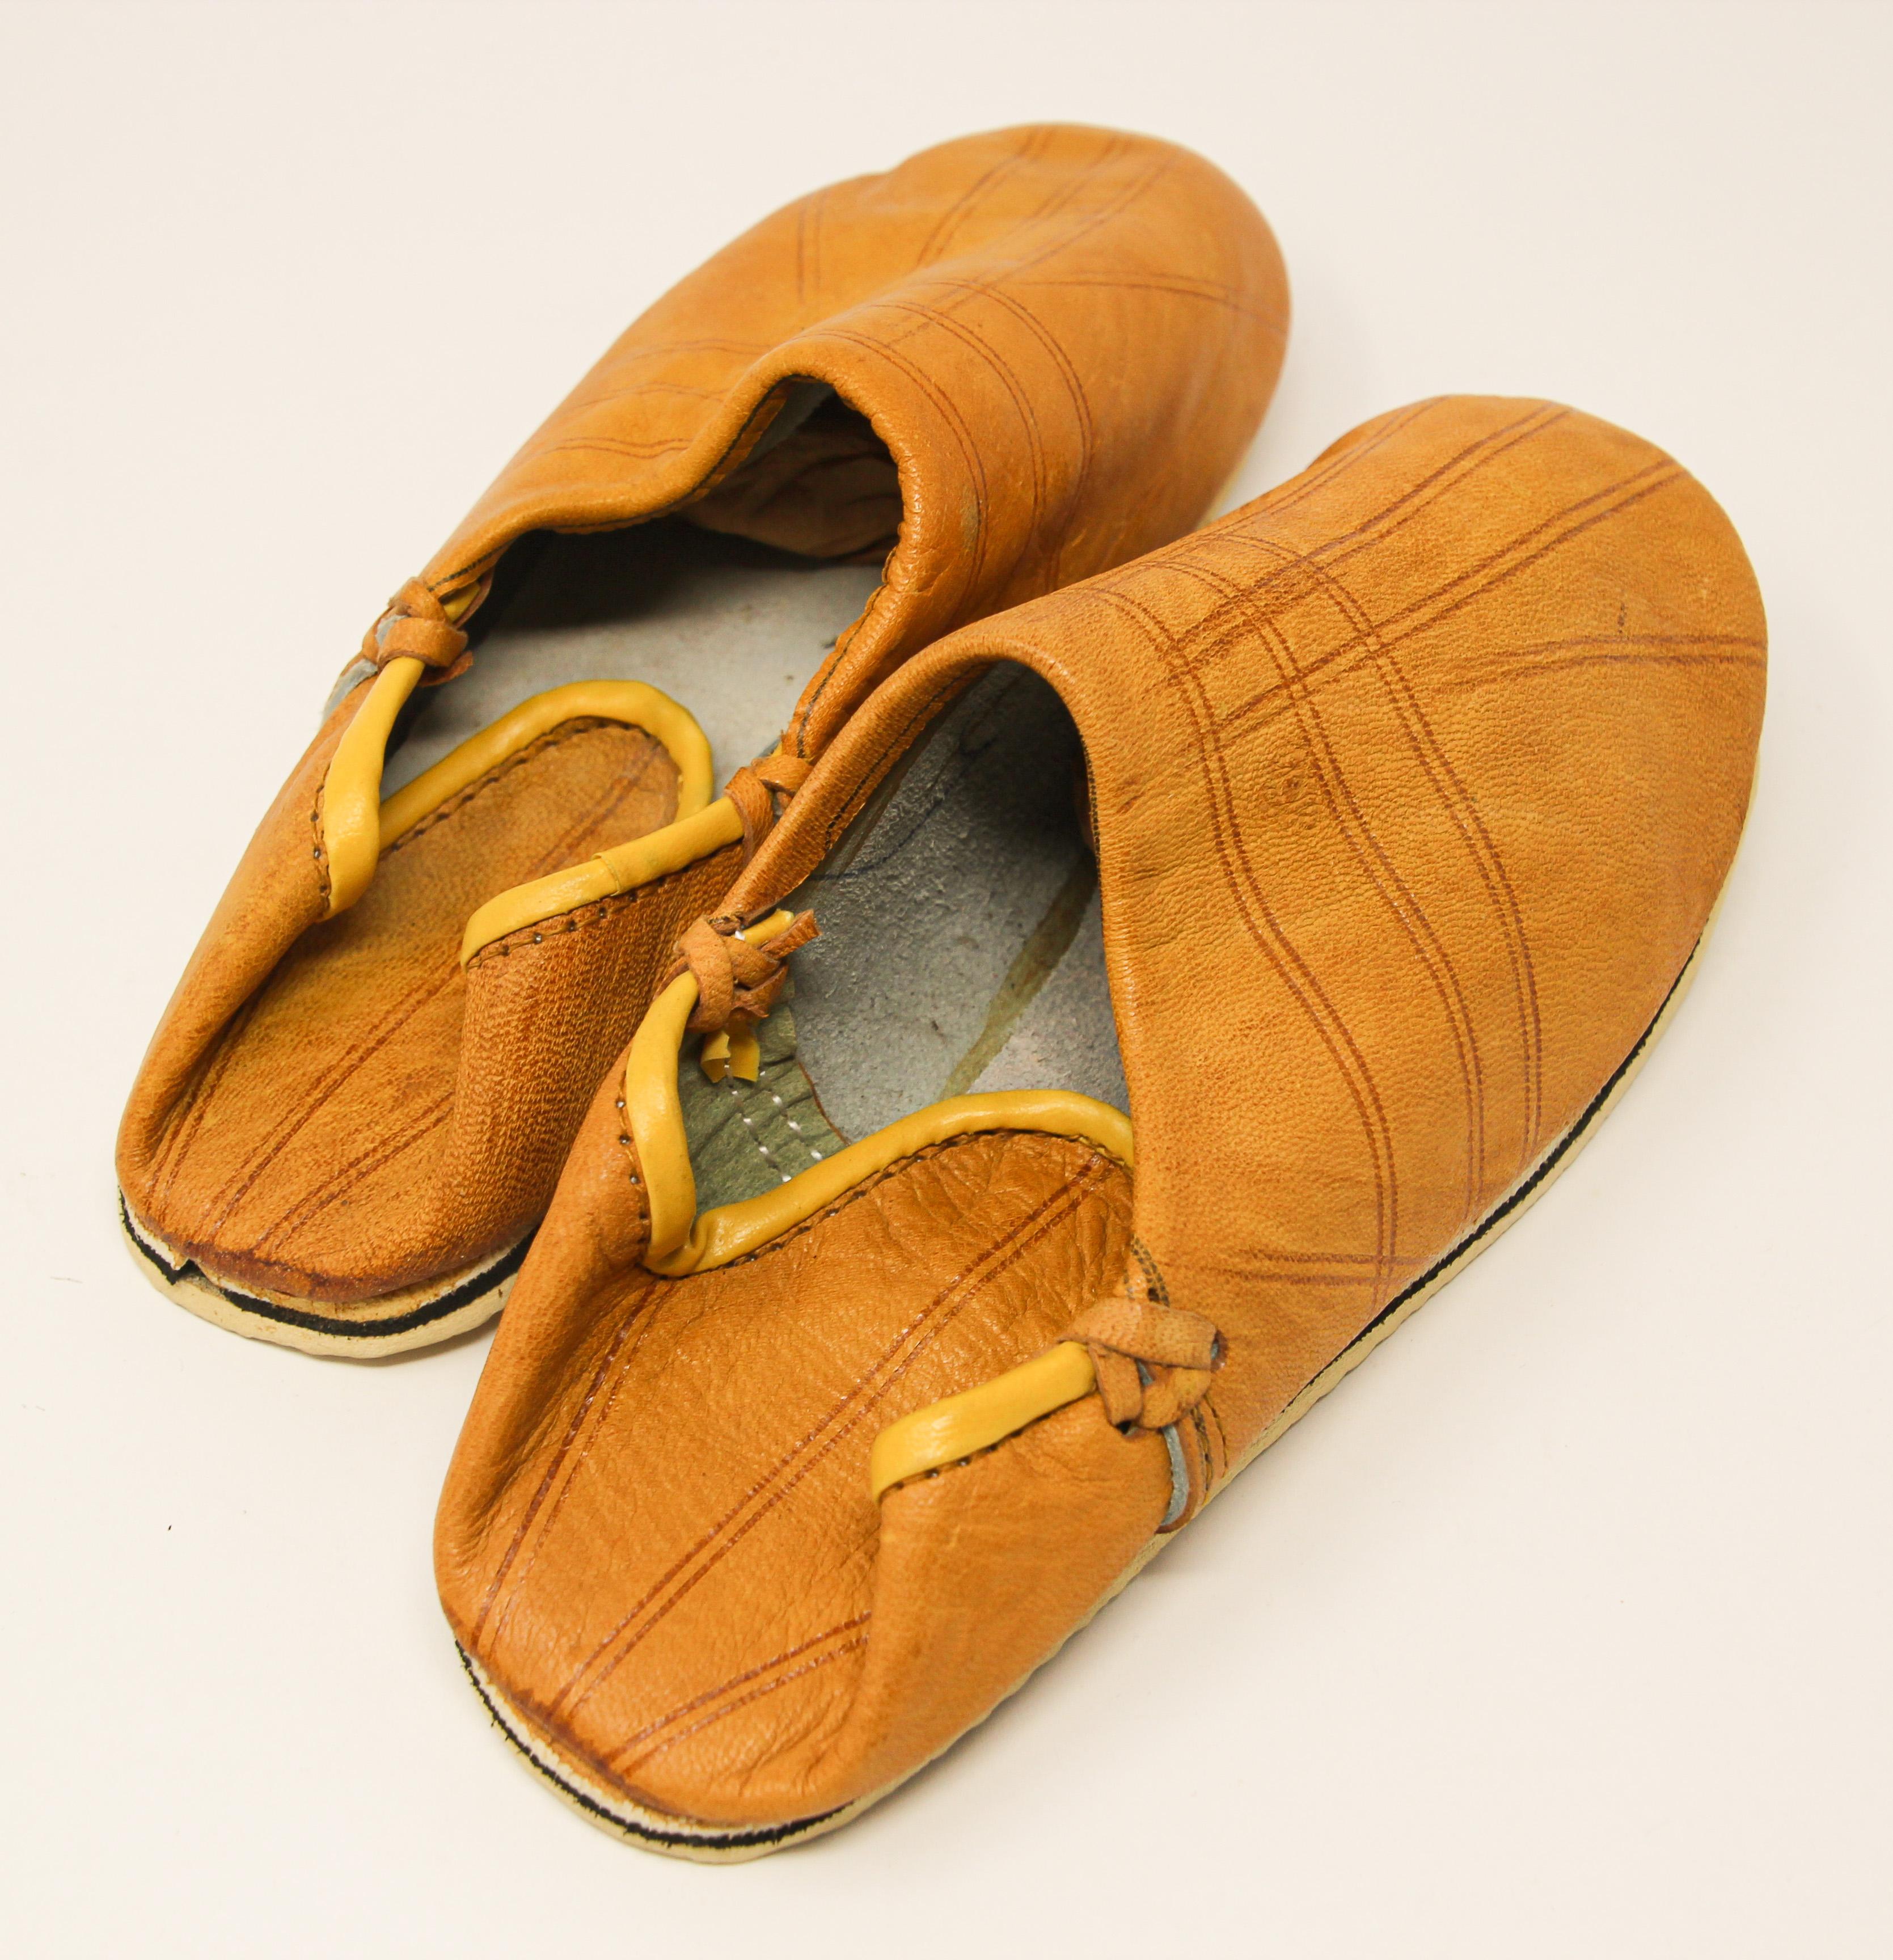 Moroccan leather yellow slippers are handmade.
handcrafted in Fez Morocco.
You won't want to take the Moroccan babouches off your feet.
Moroccan shoes to wear around the pool or at the beach just in time for Summer.
Great to use as intended or as a